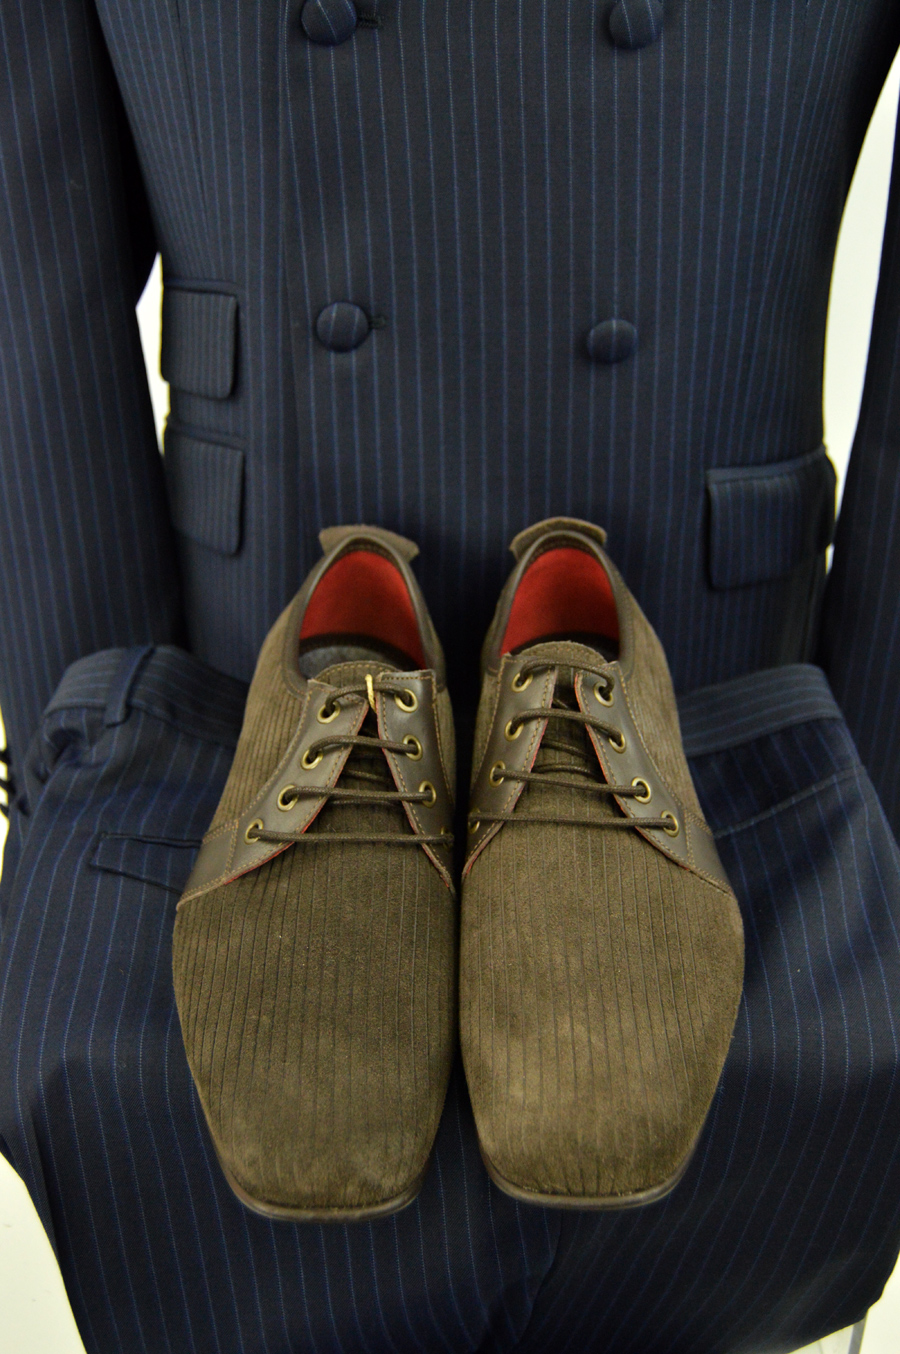 modshoes-suede-corded-shoes-rawlings-with-blue-striped-mod-suit-from-adaptor-clothing-01